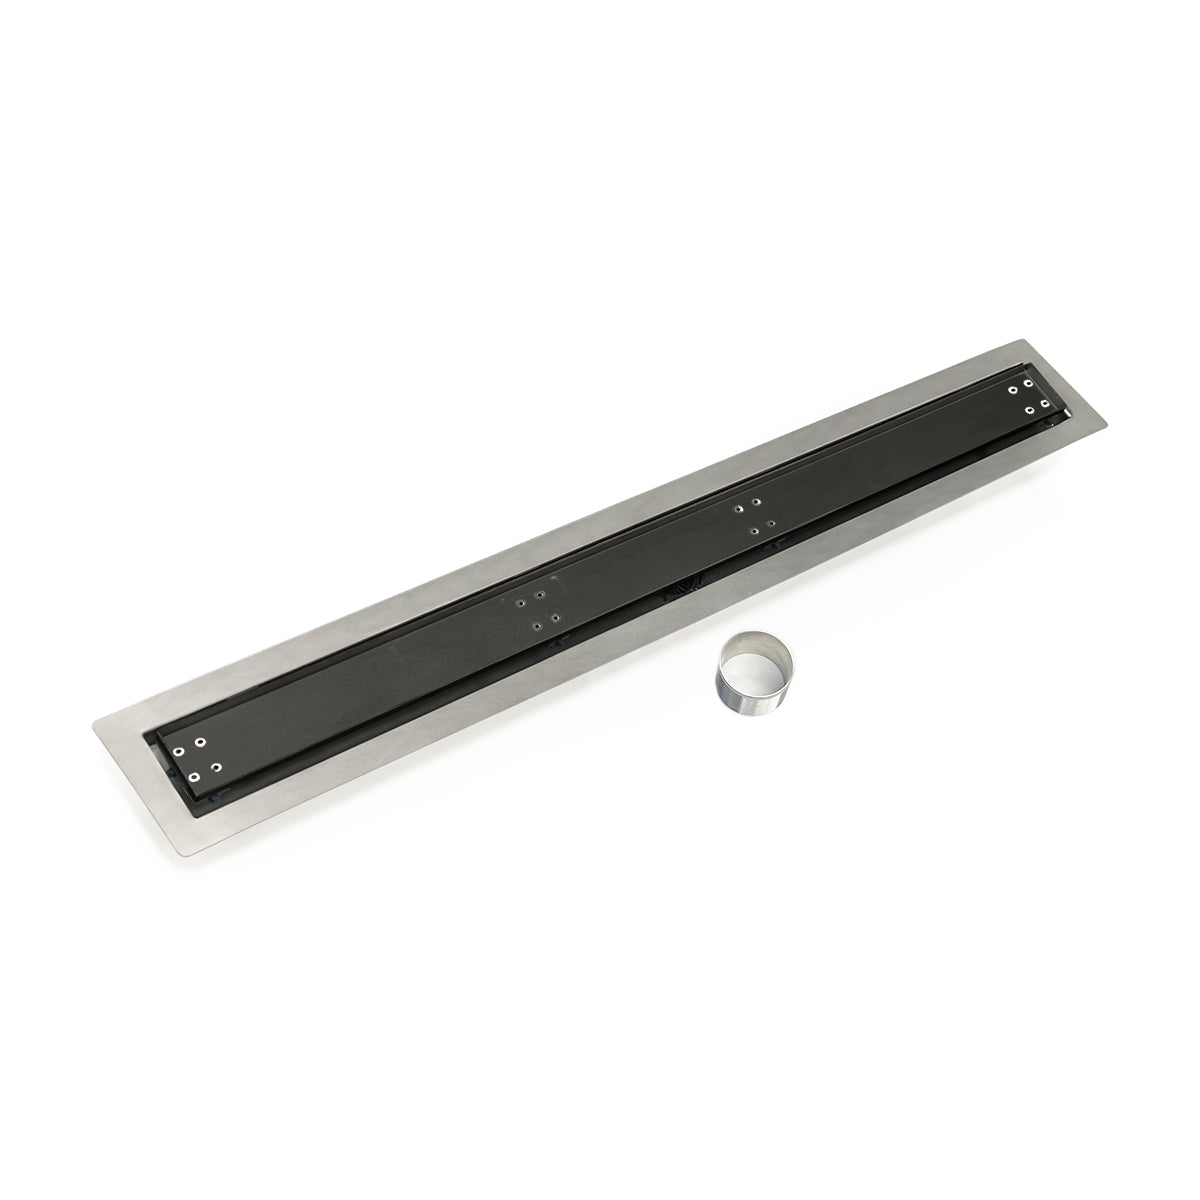 Infinity Drain 36" FCB Series Double Waterproofing Linear Drain Kit with Tile Insert Frame